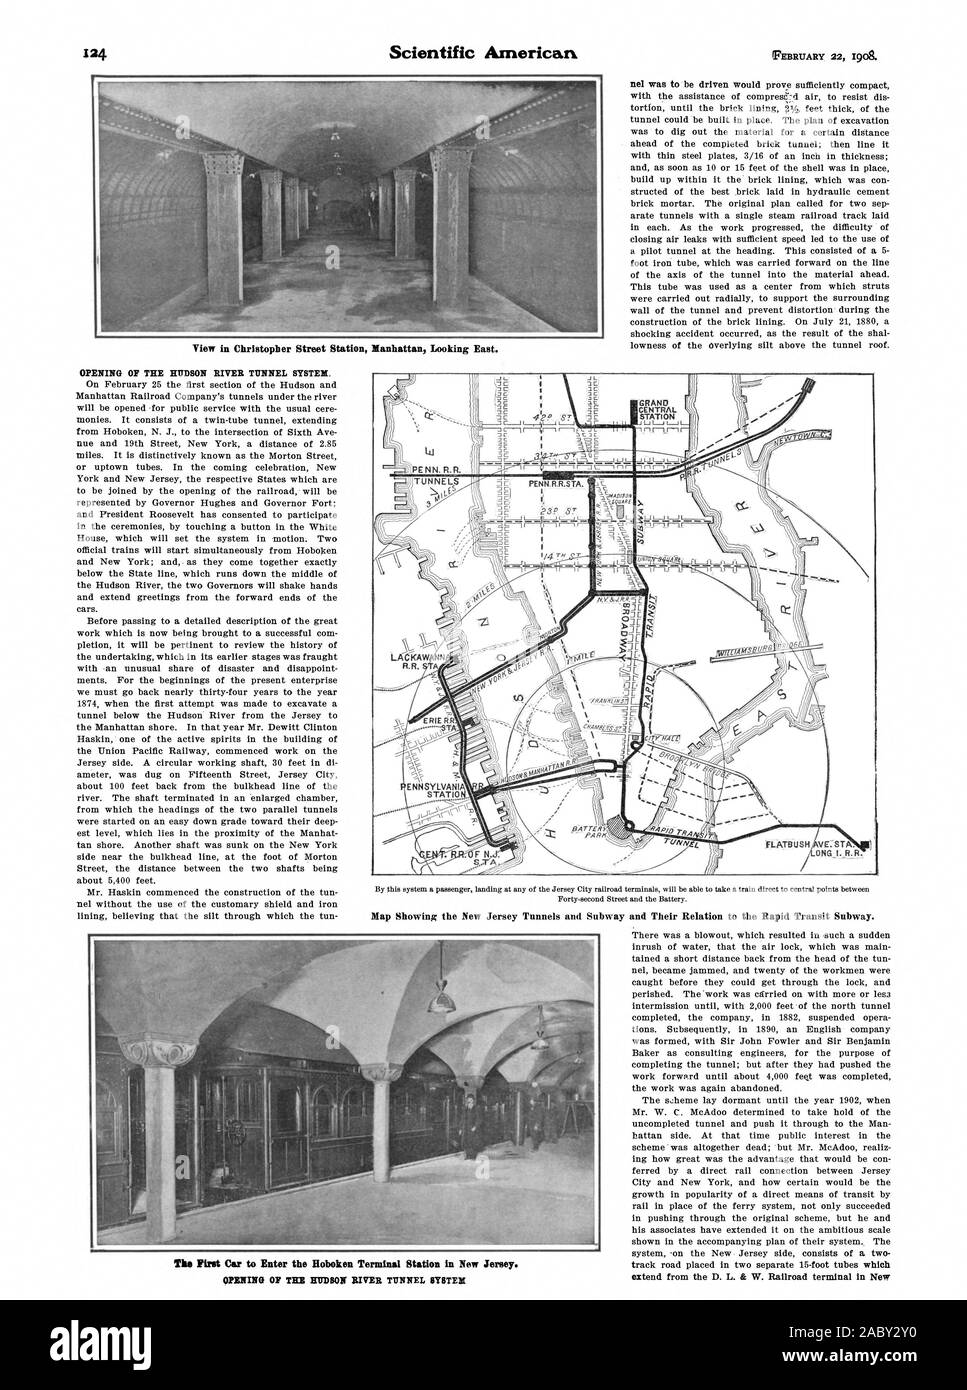 View in Christopher Street Station Manhattan Looking East. FEBRUARY 22 190& Map Showing the New Jersey Tunnels and Subway and Their Relation to the Rapid Transit Subway. extend from the D. L. & W. Railroad terminal in New, scientific american, 1908-02-22 Stock Photo